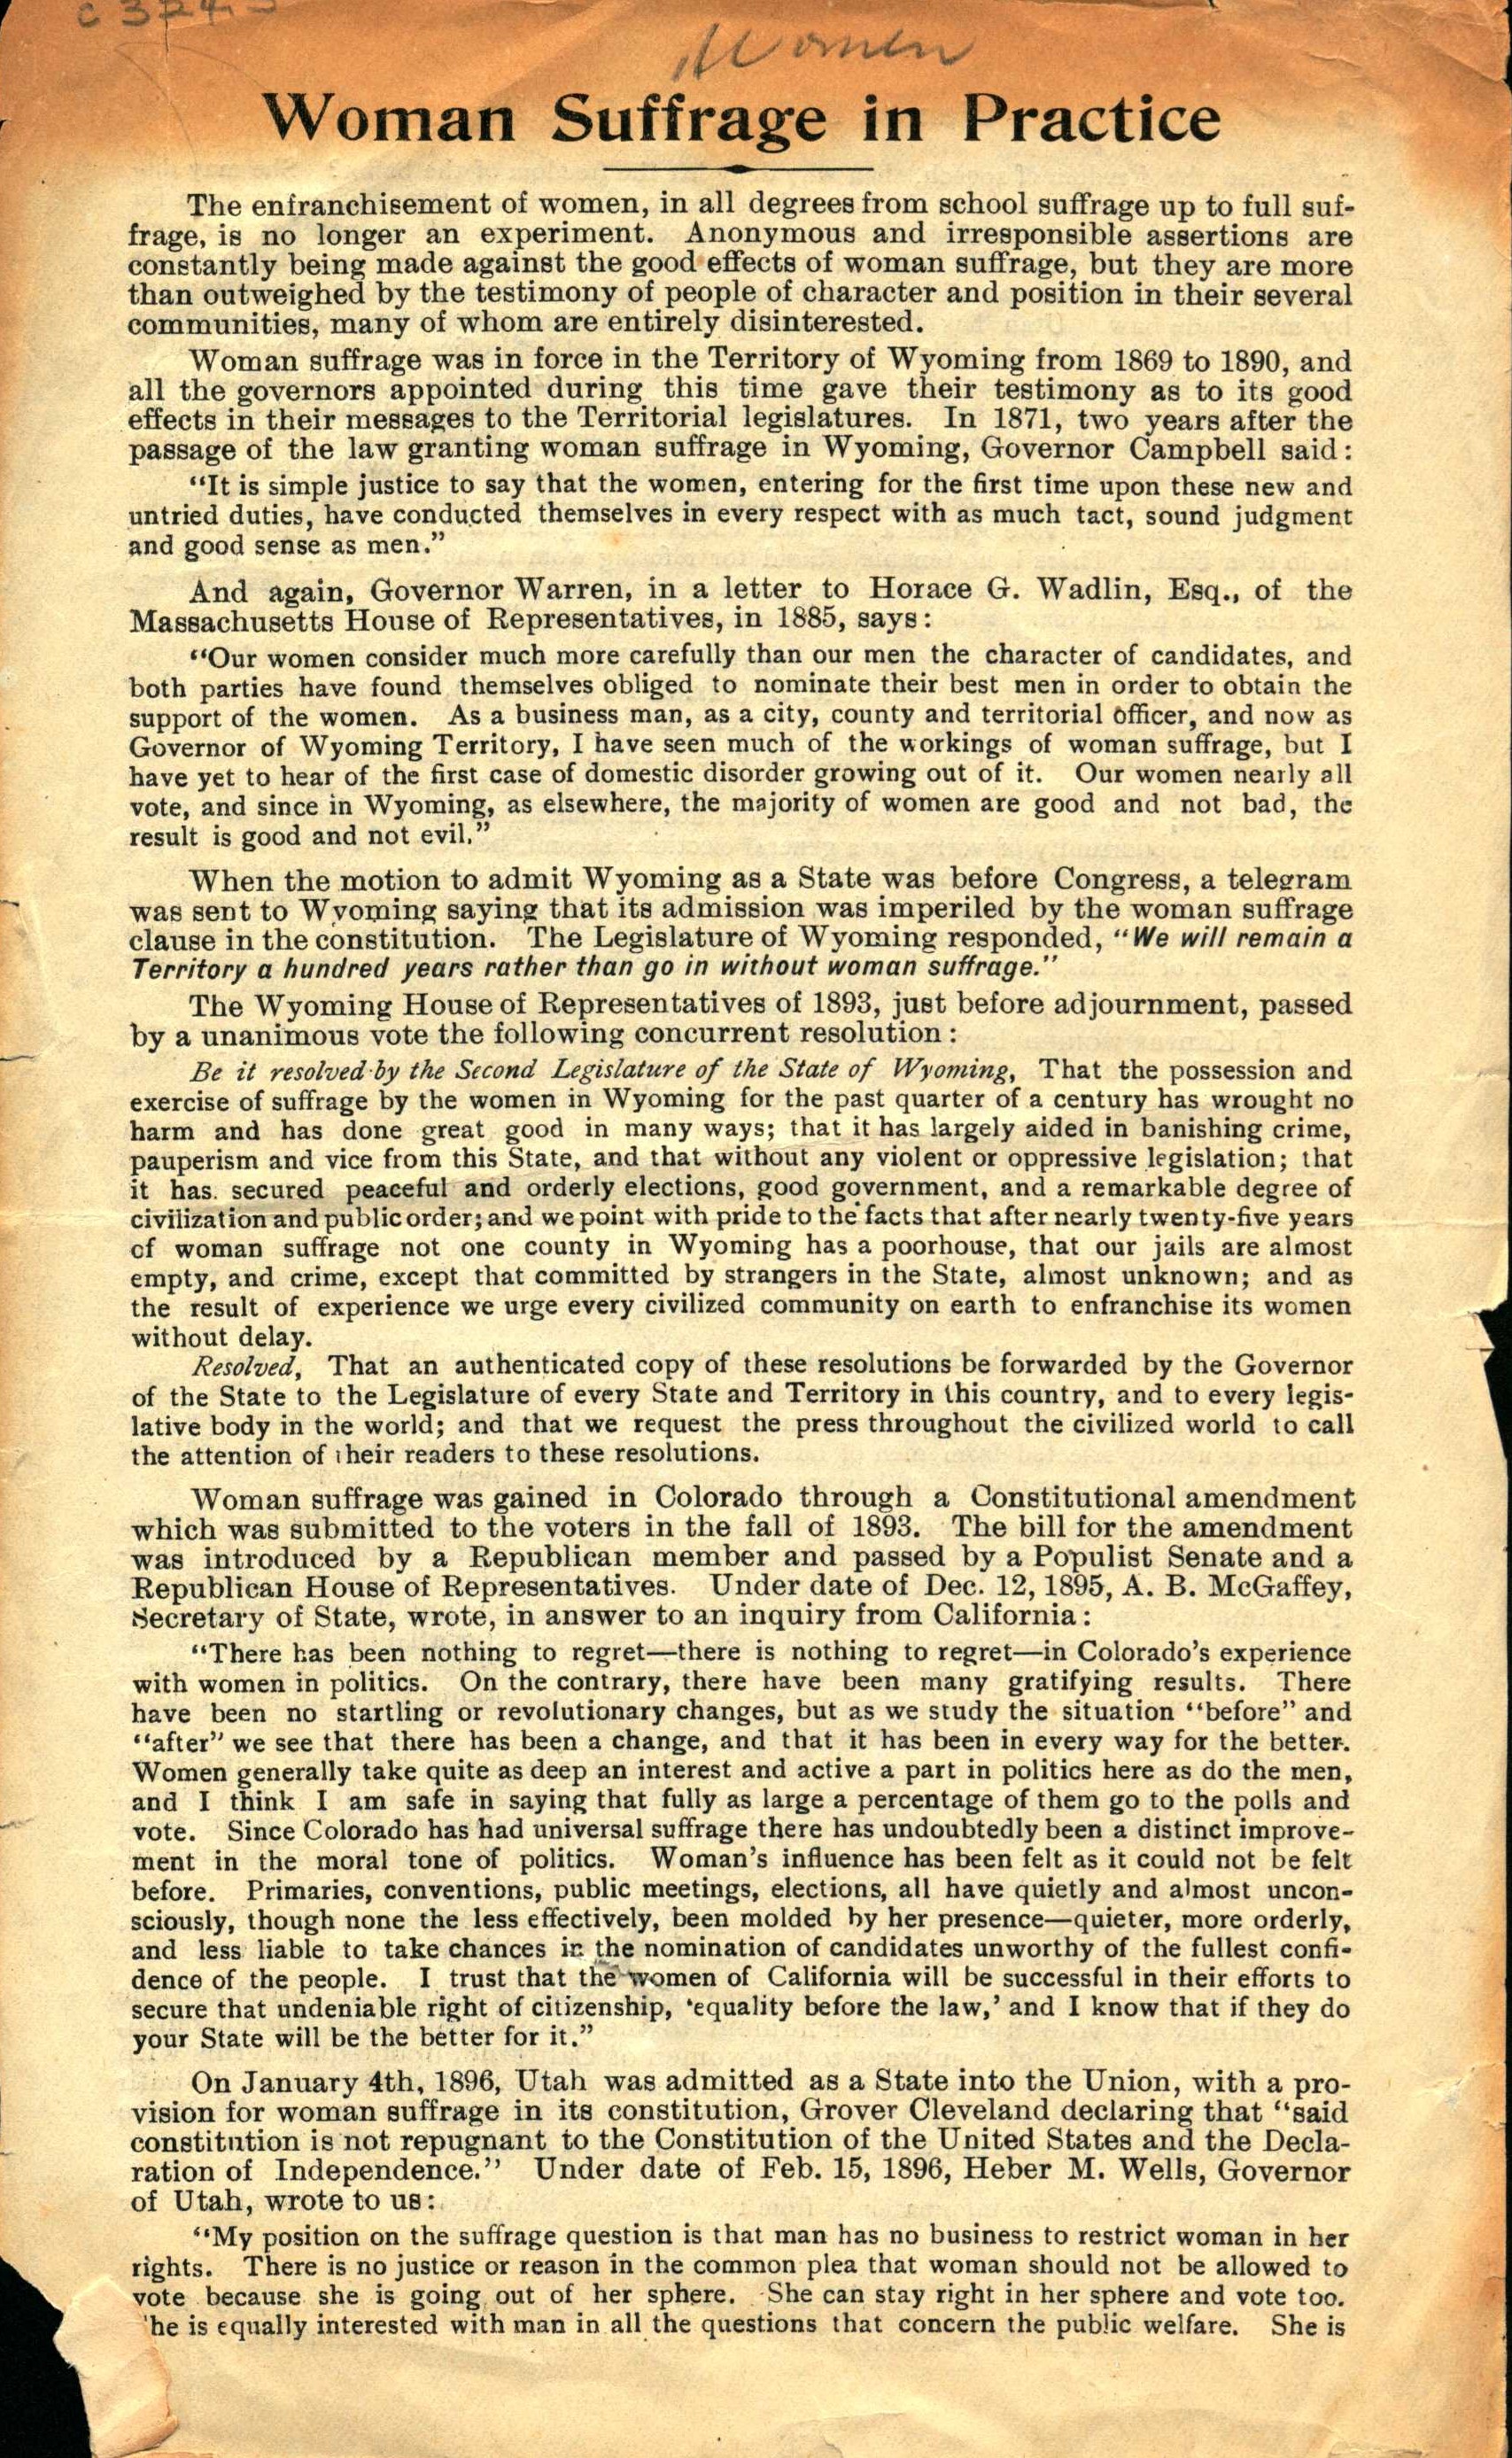 Shows title information and the first page of the text